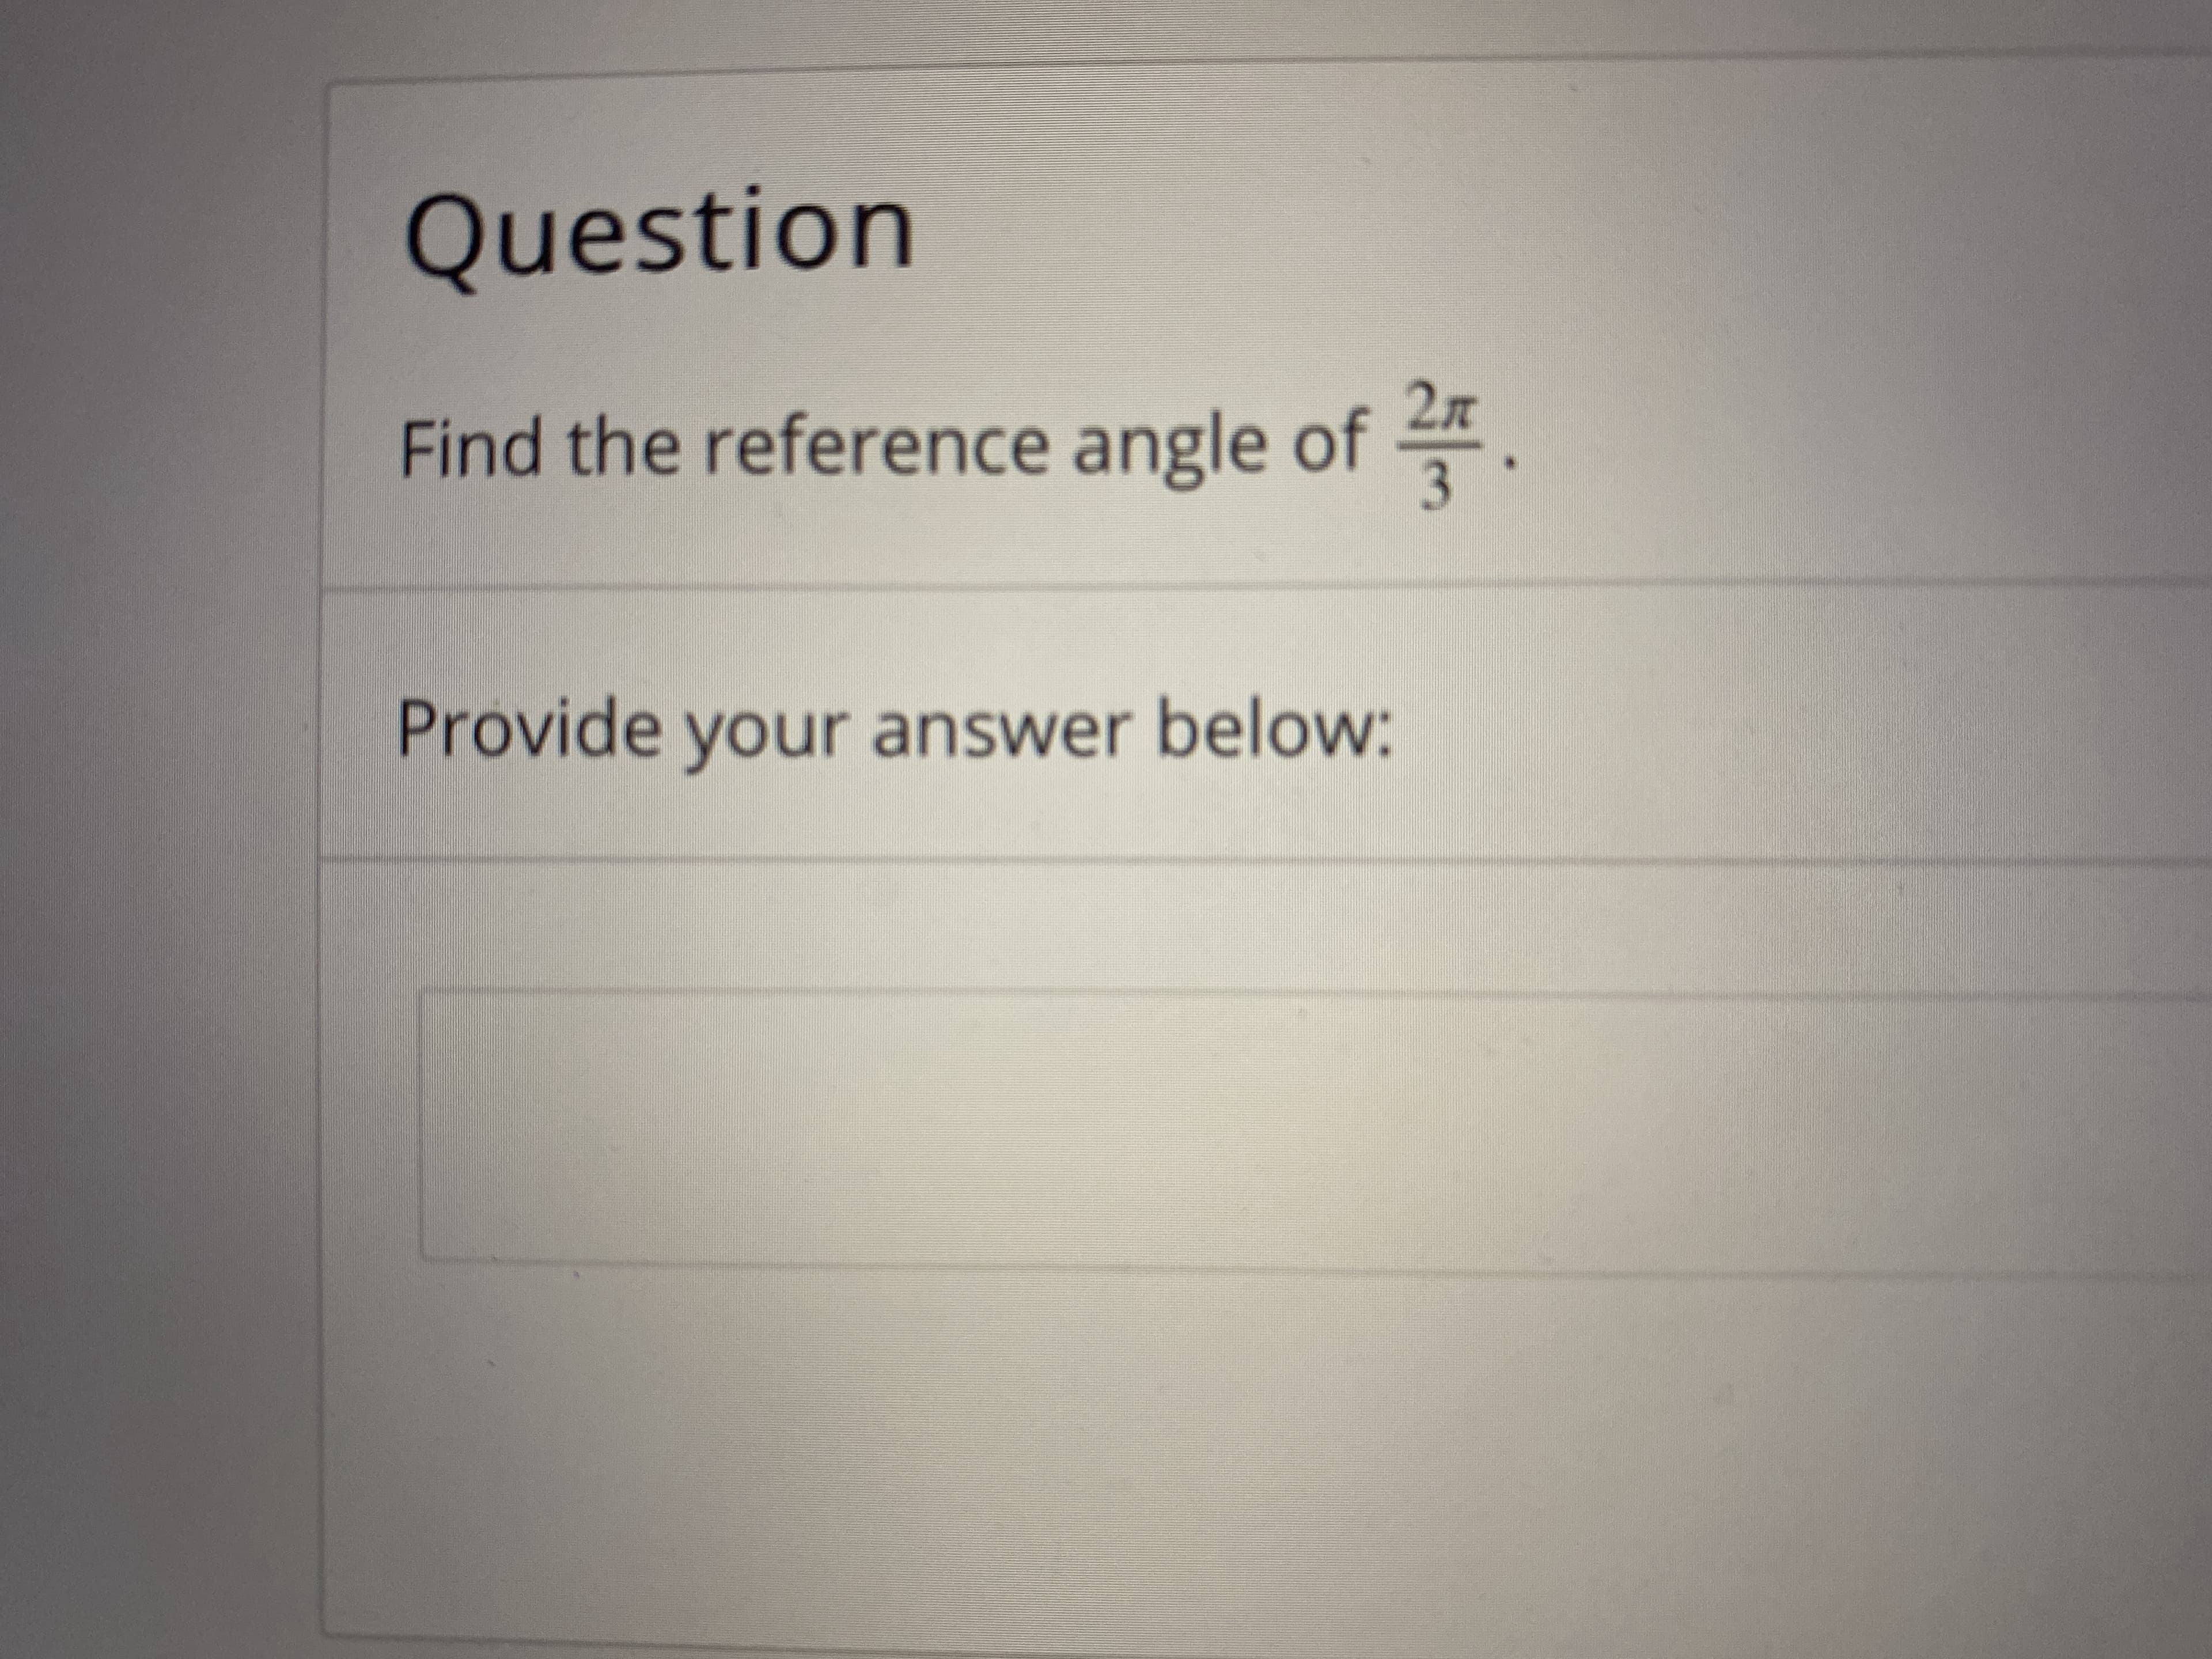 2n
Find the reference angle of
